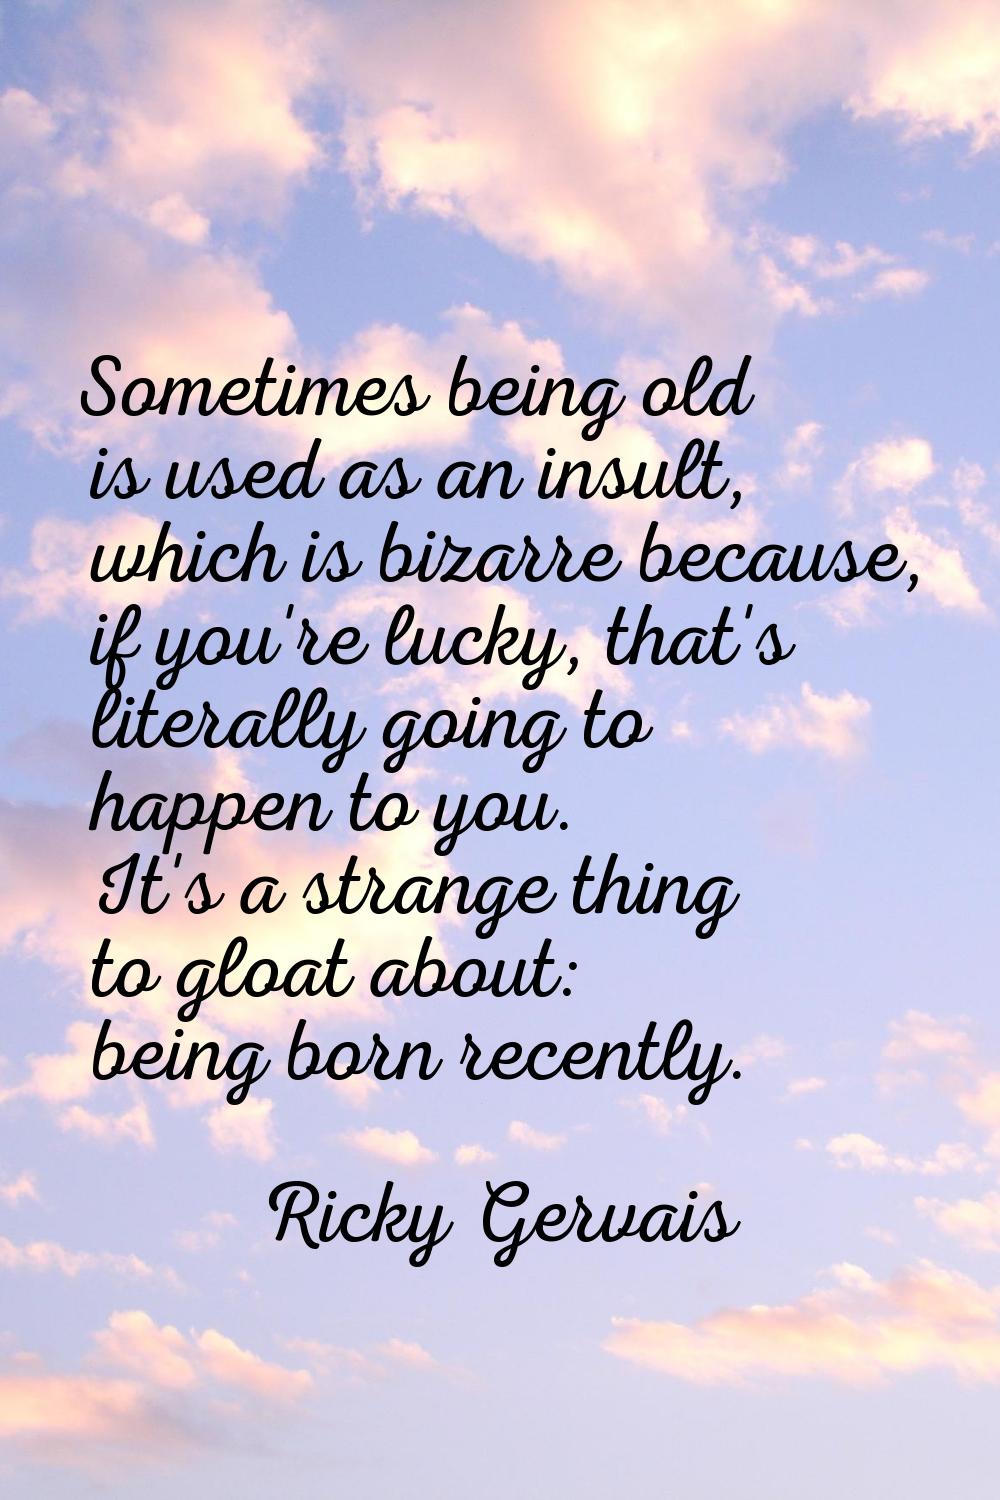 Sometimes being old is used as an insult, which is bizarre because, if you're lucky, that's literal